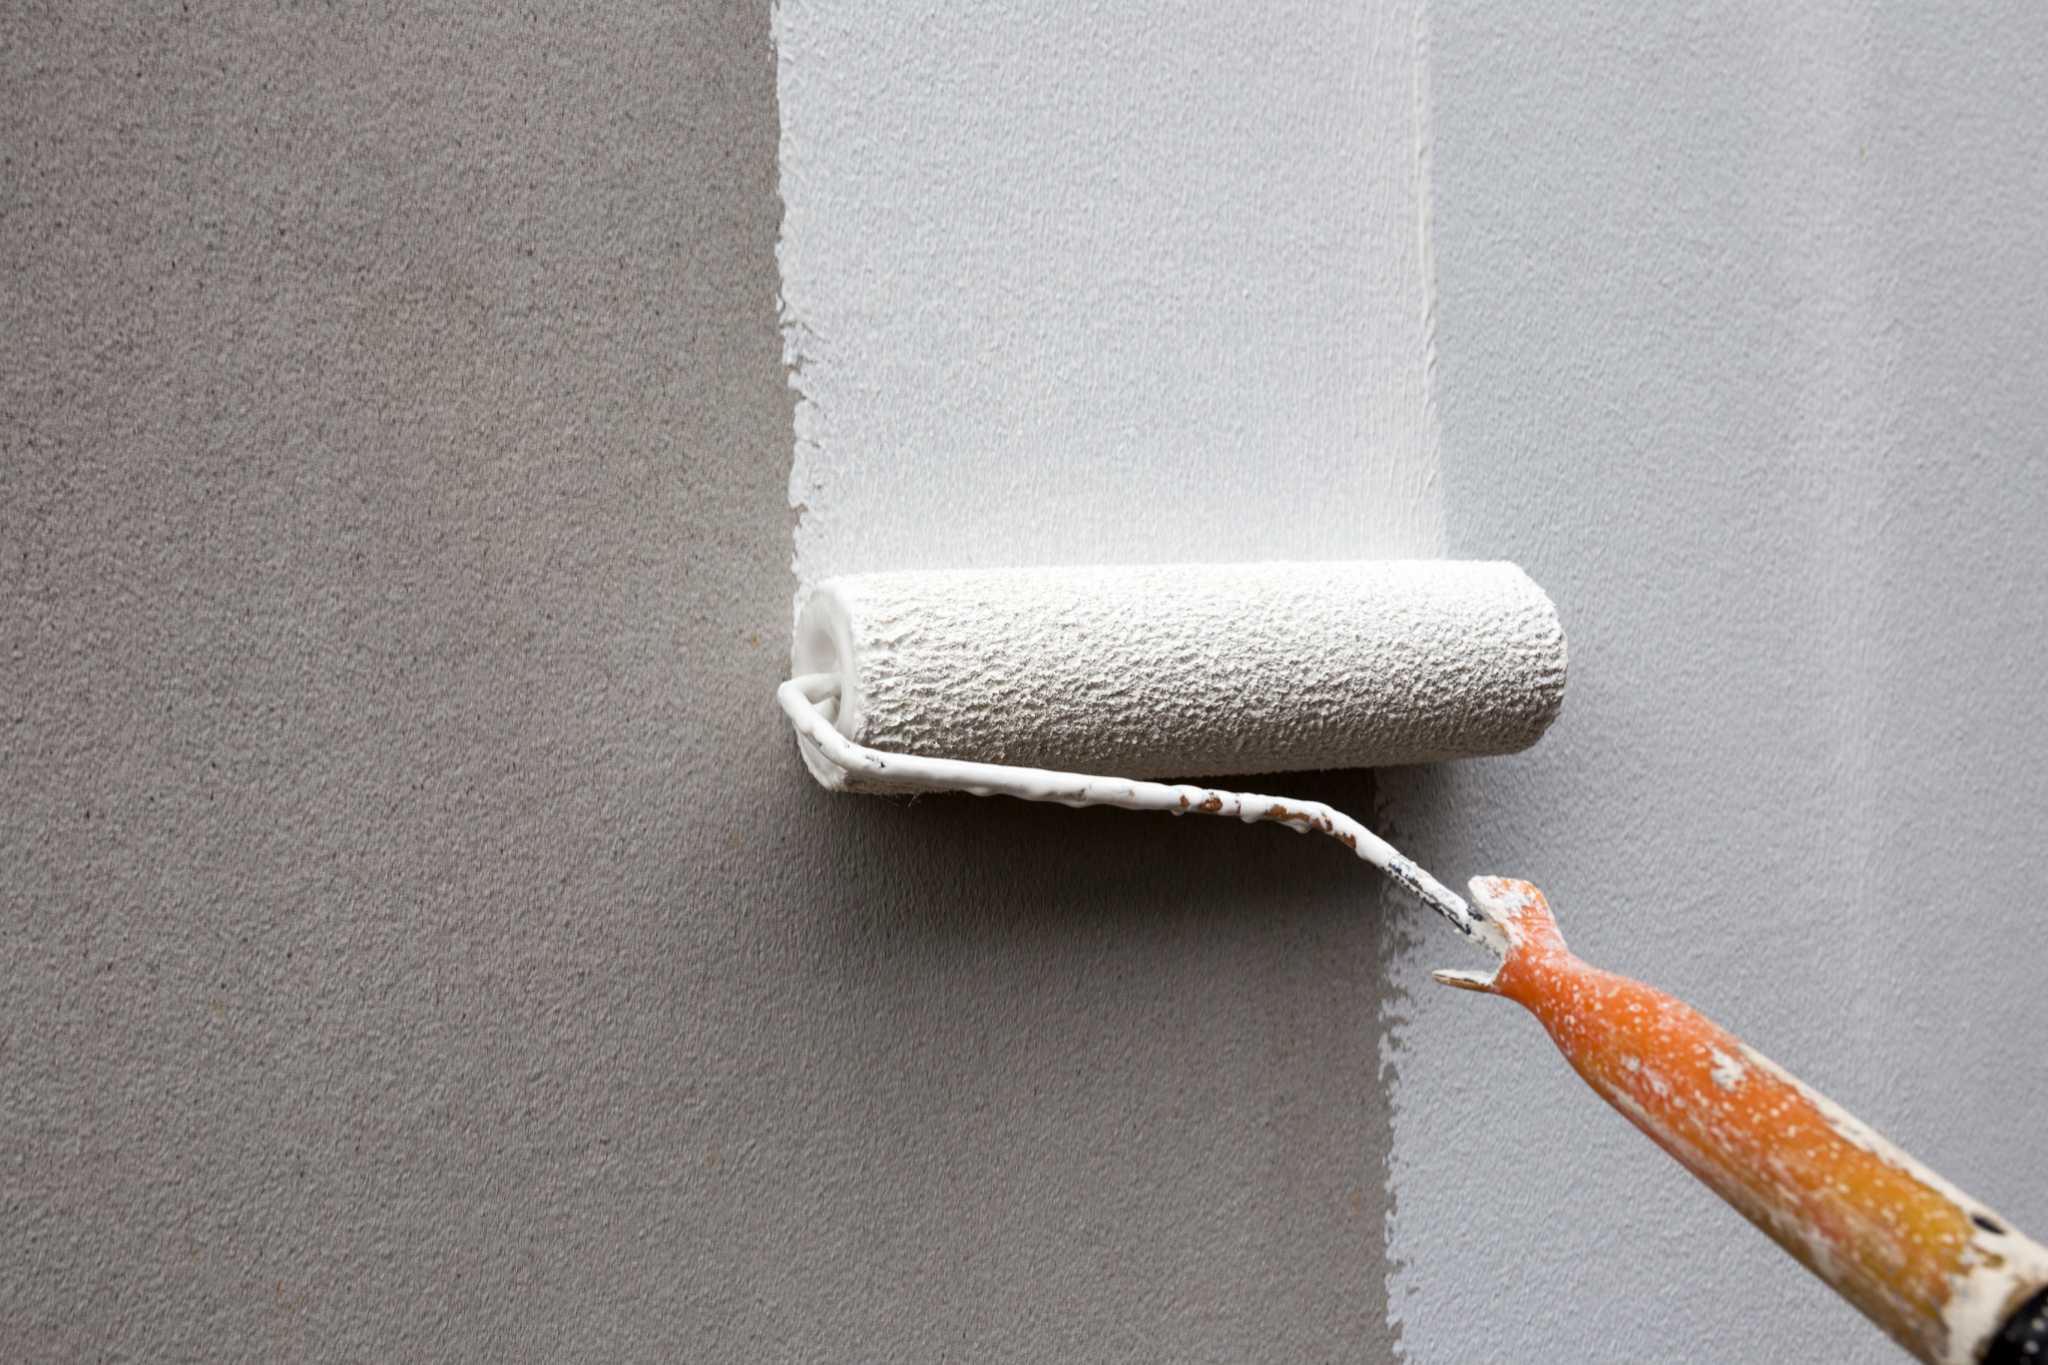 Applying Drywall Compound With a Textured Roller